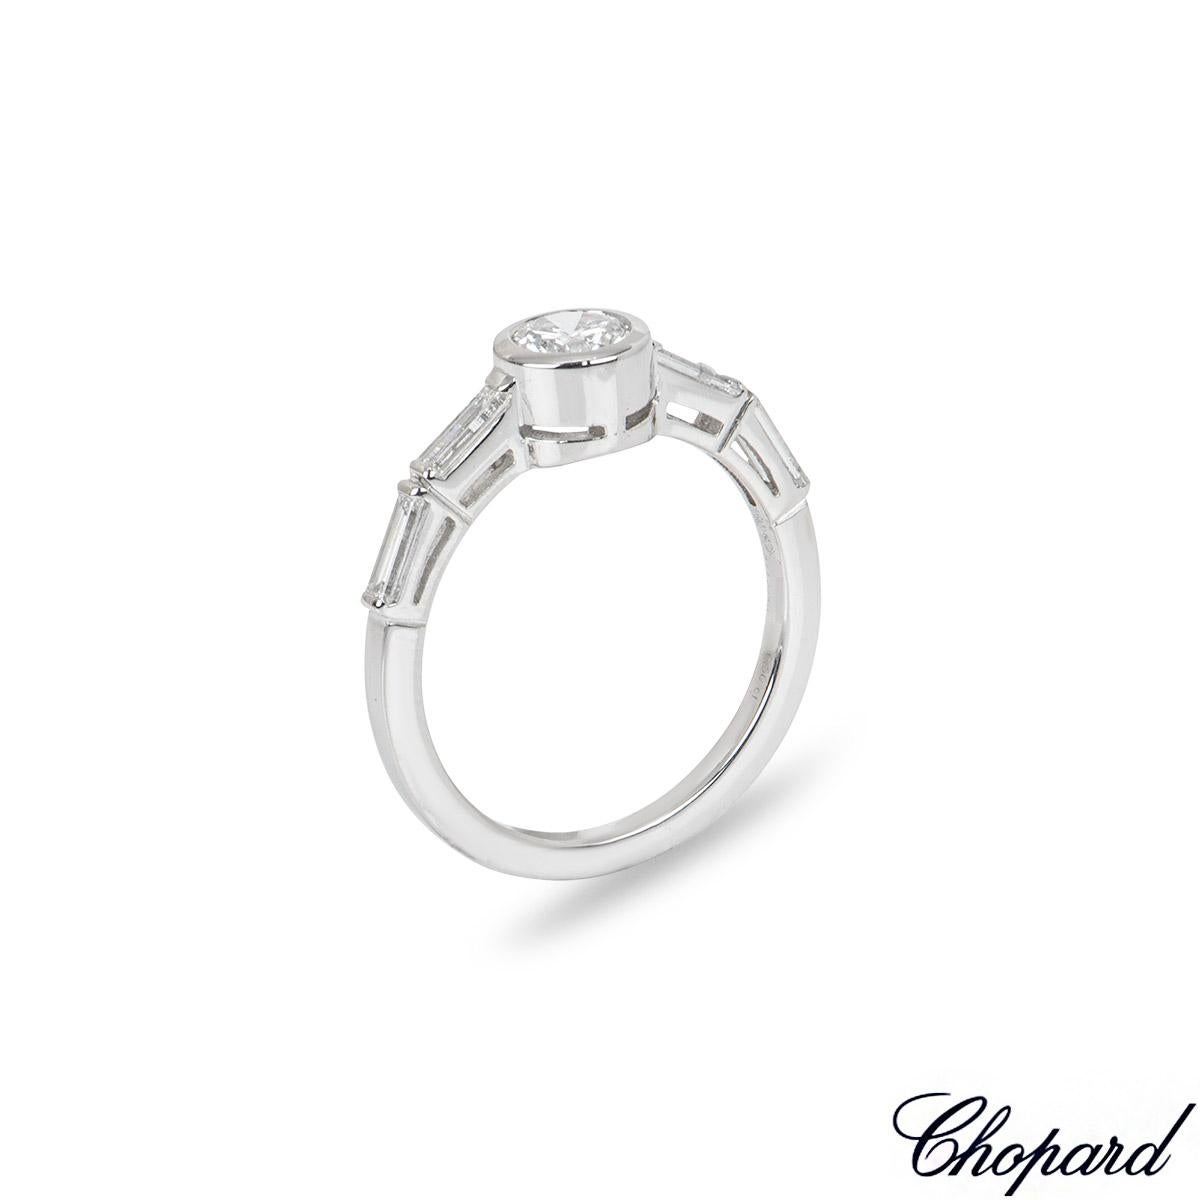 A classy 18k white gold diamond ring by Chopard. The ring is set to the centre with a round brilliant cut diamond in a modern bezel setting weighing 0.50ct, E-F colour and VS clarity. Complementing the centre stone are 4 baguette cut diamonds set to